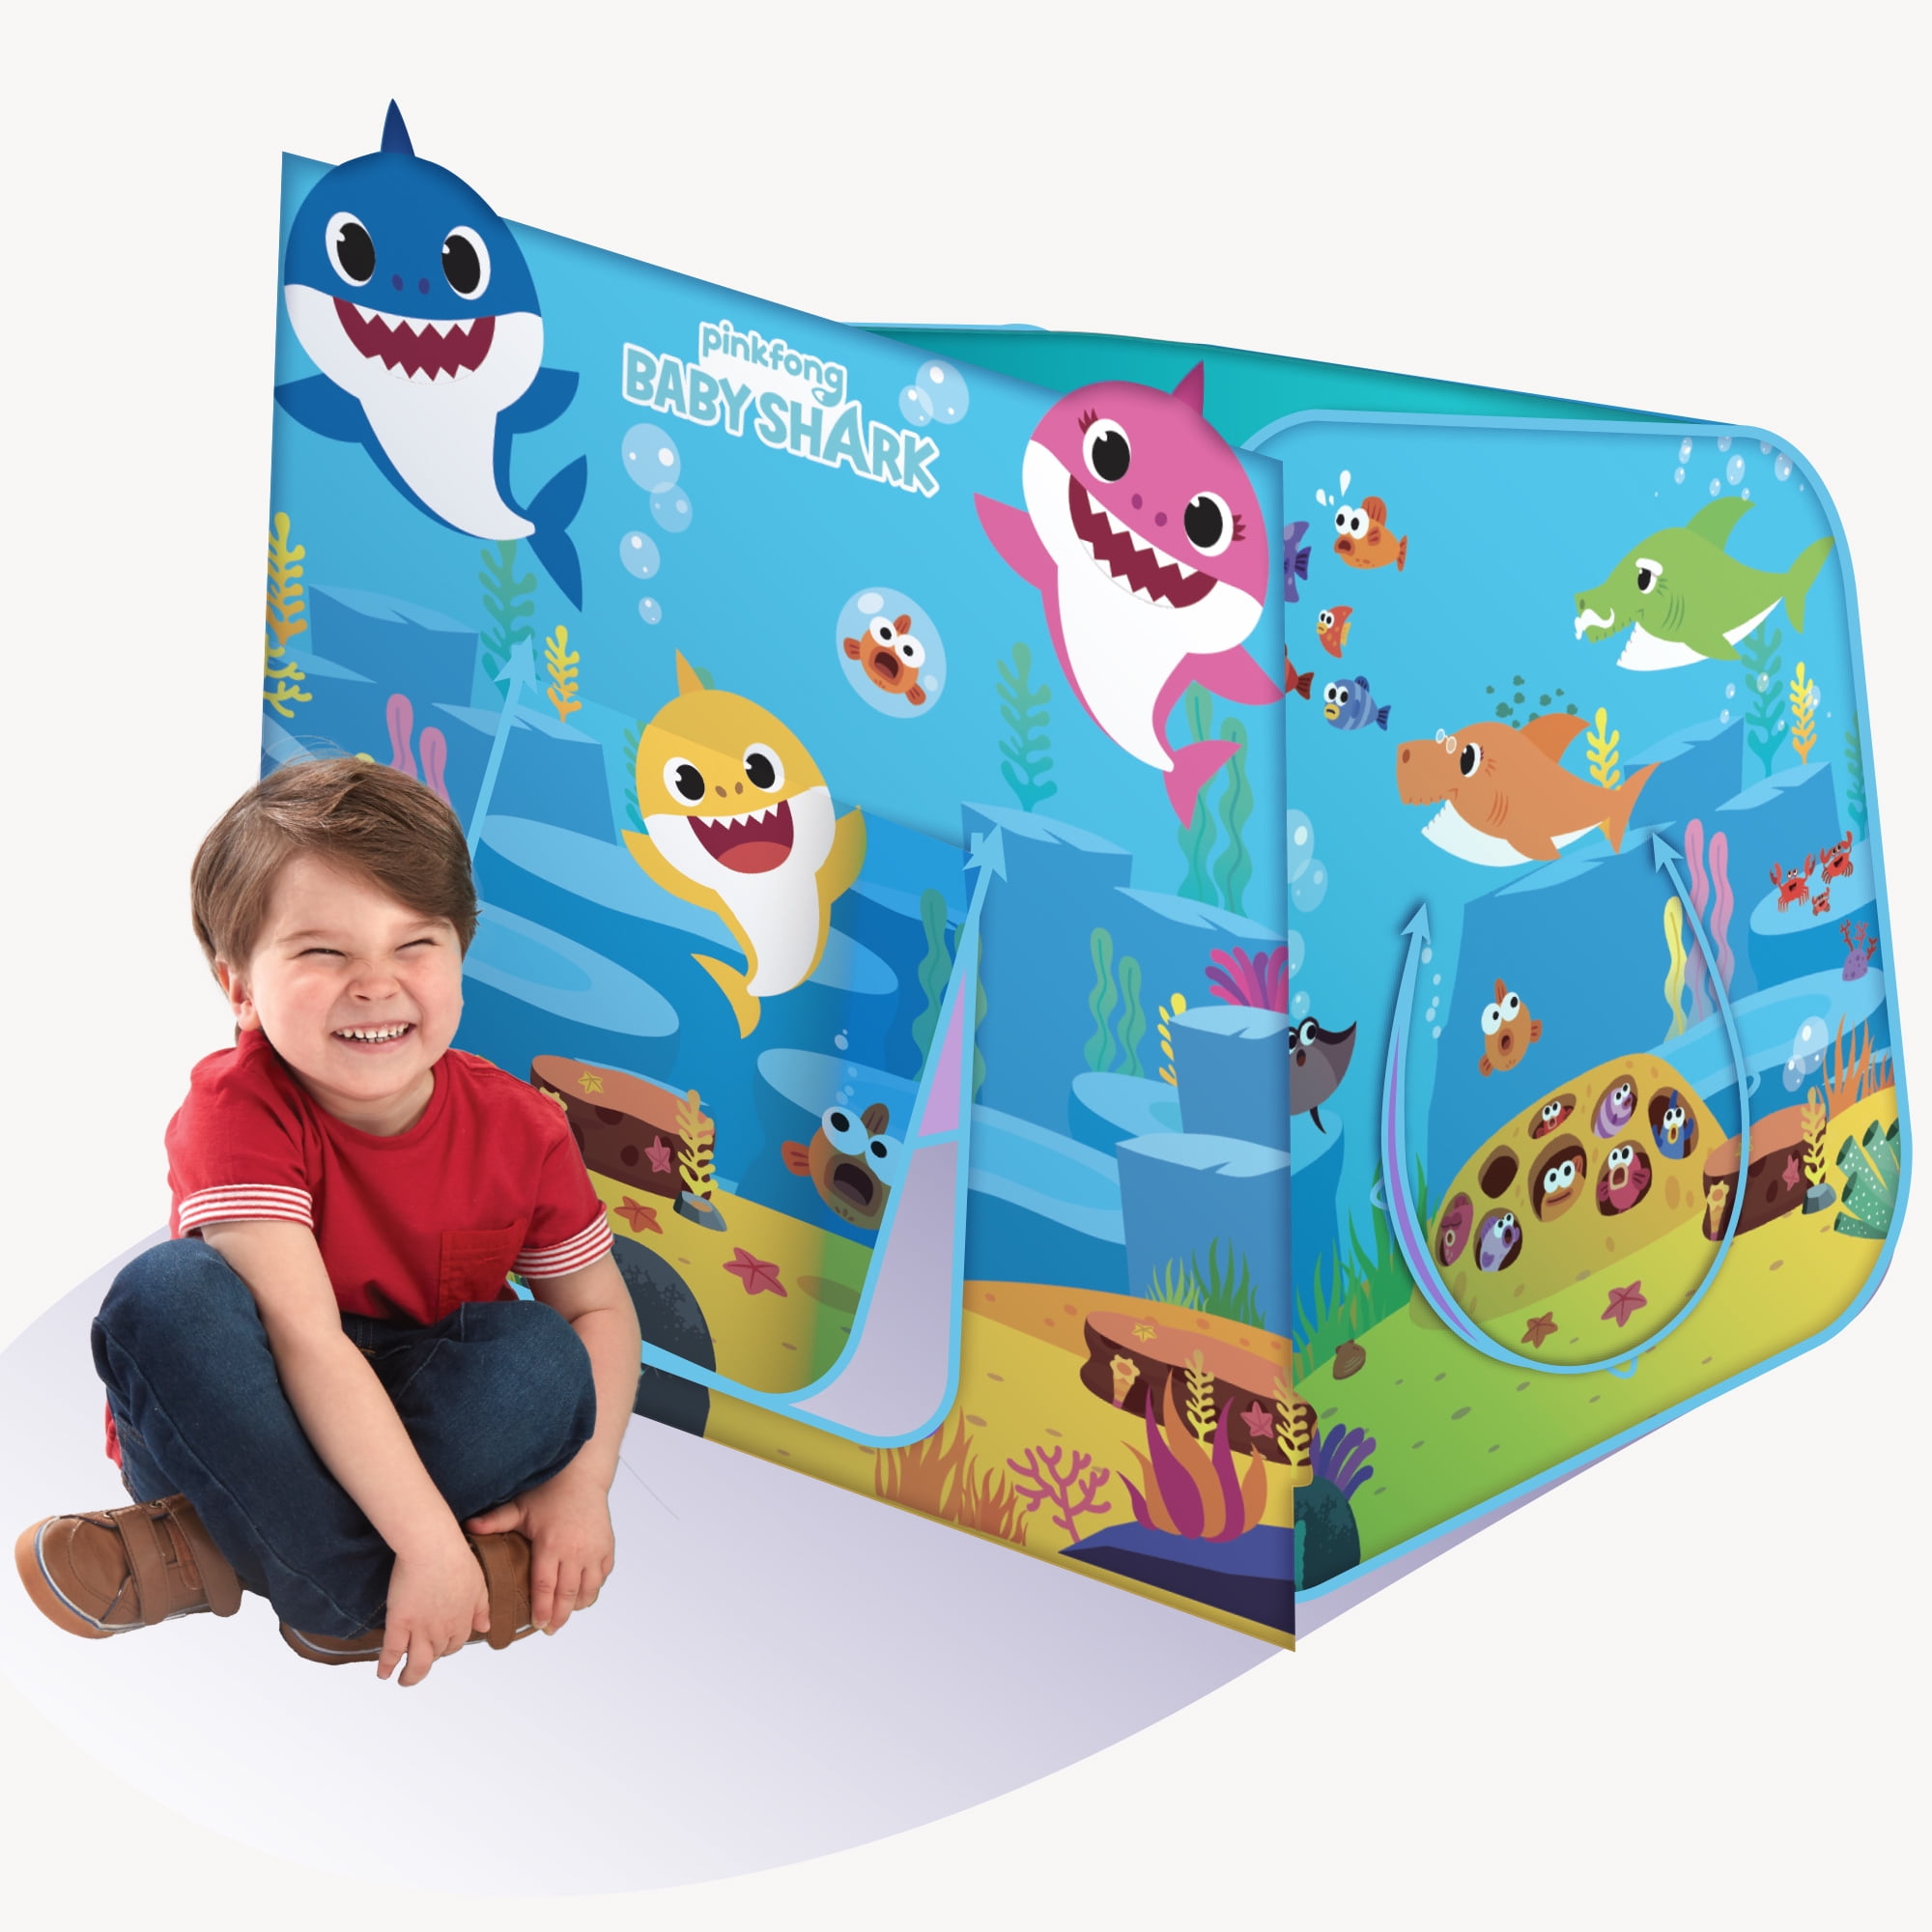 Pinkfong Baby Shark Tent Foldable Kids Pop up Classic Cube Play House for sale online 